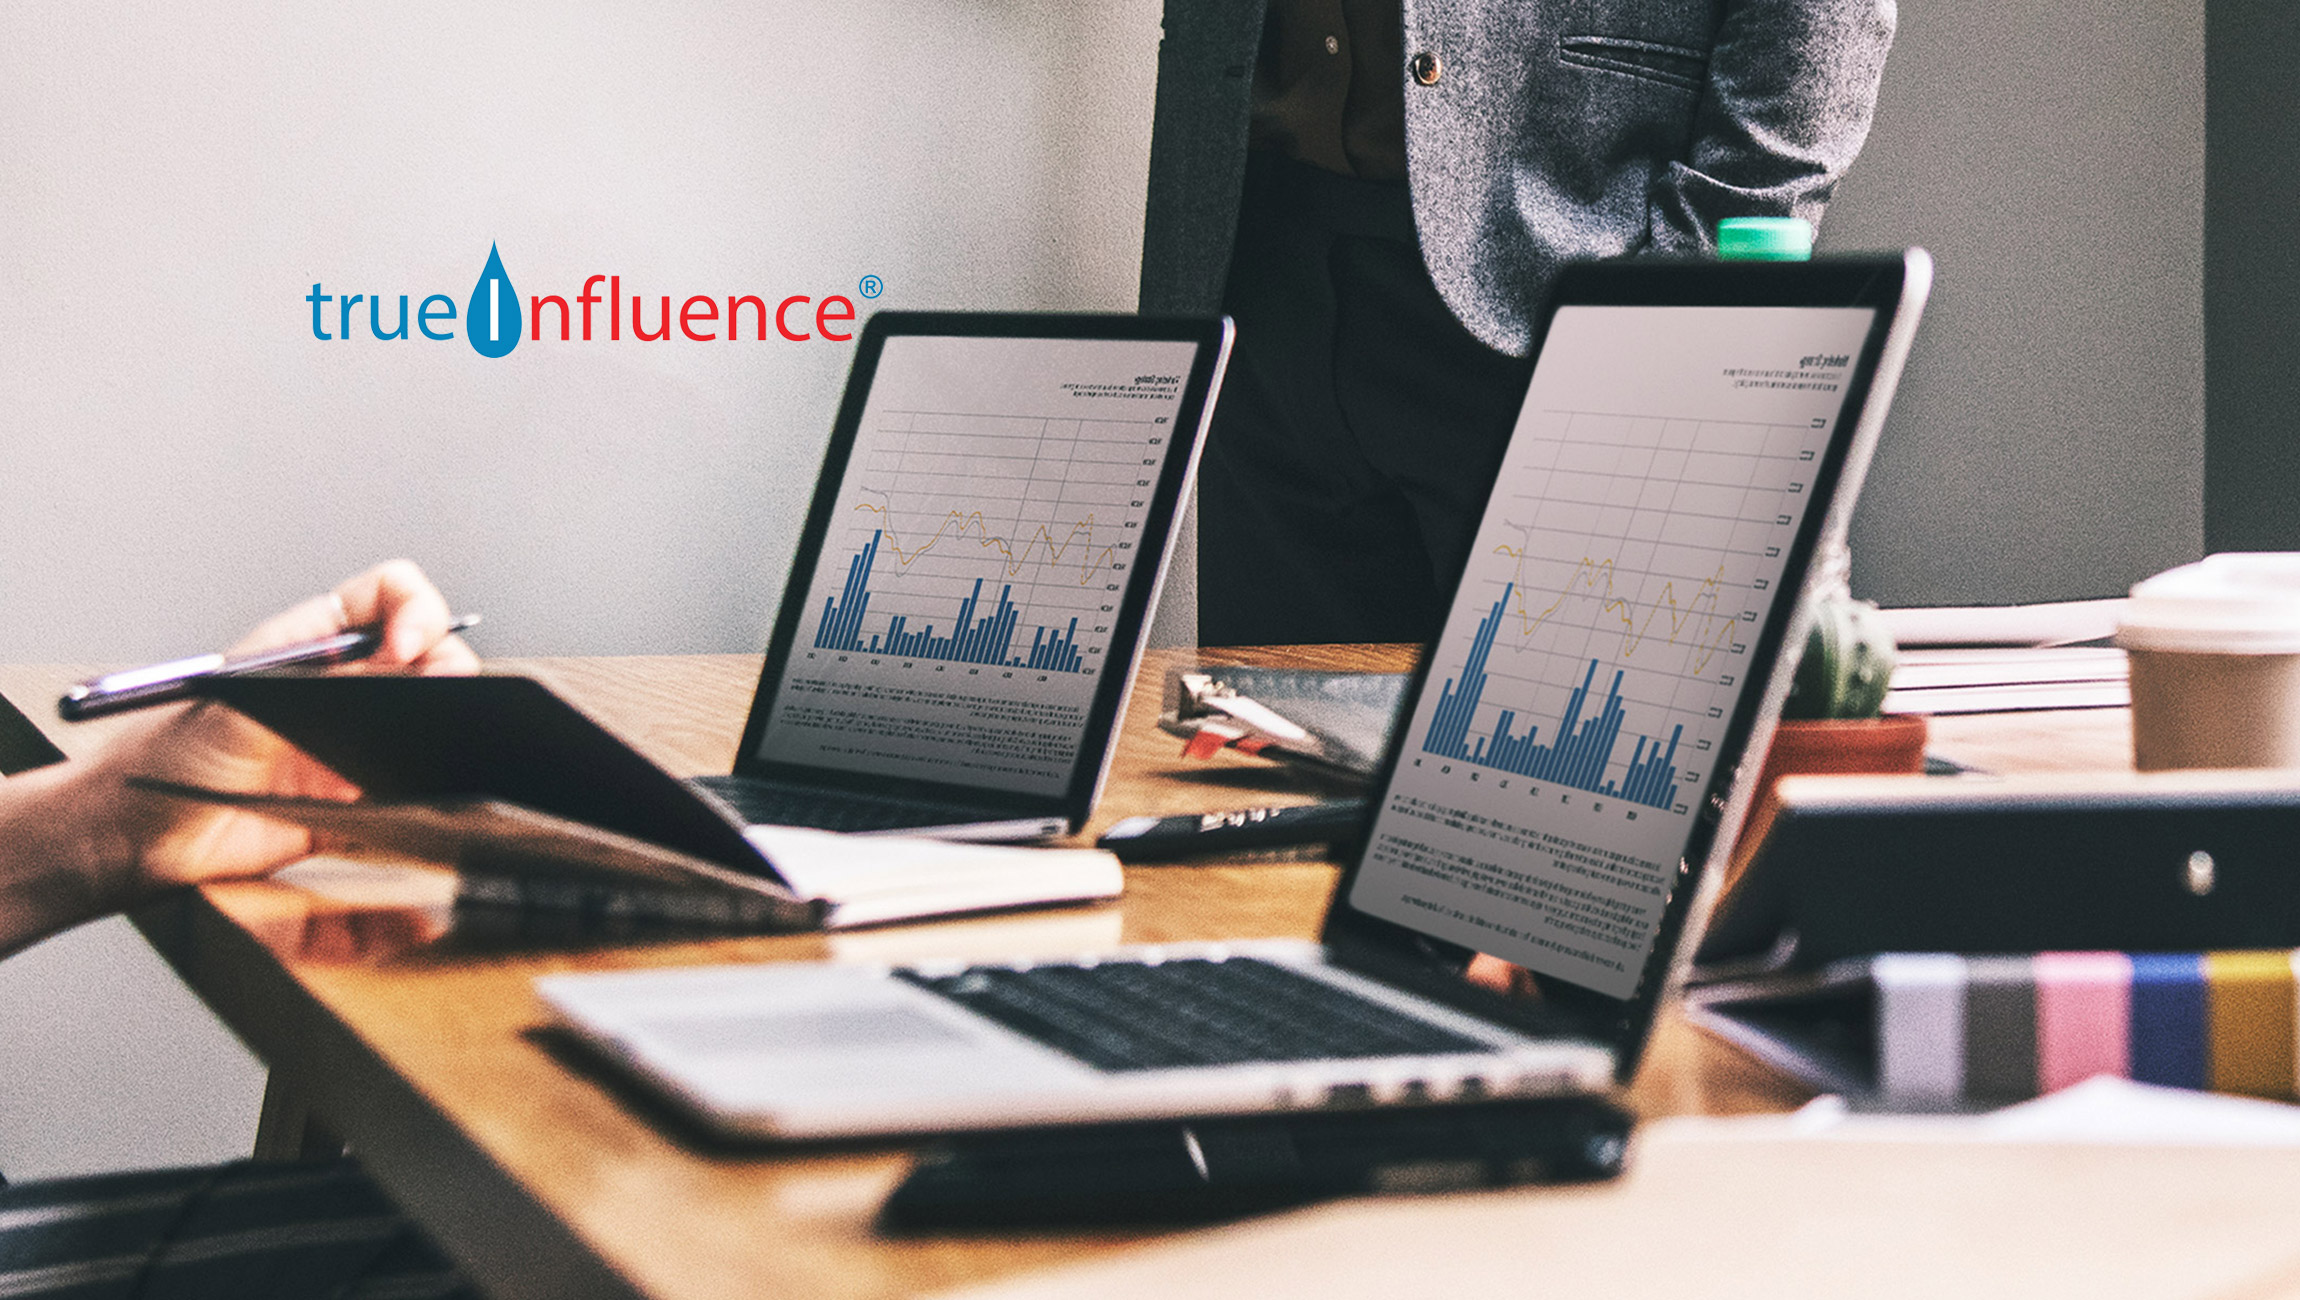 True Influence® Surpasses Growth and Revenue Milestones During the Global Pandemic